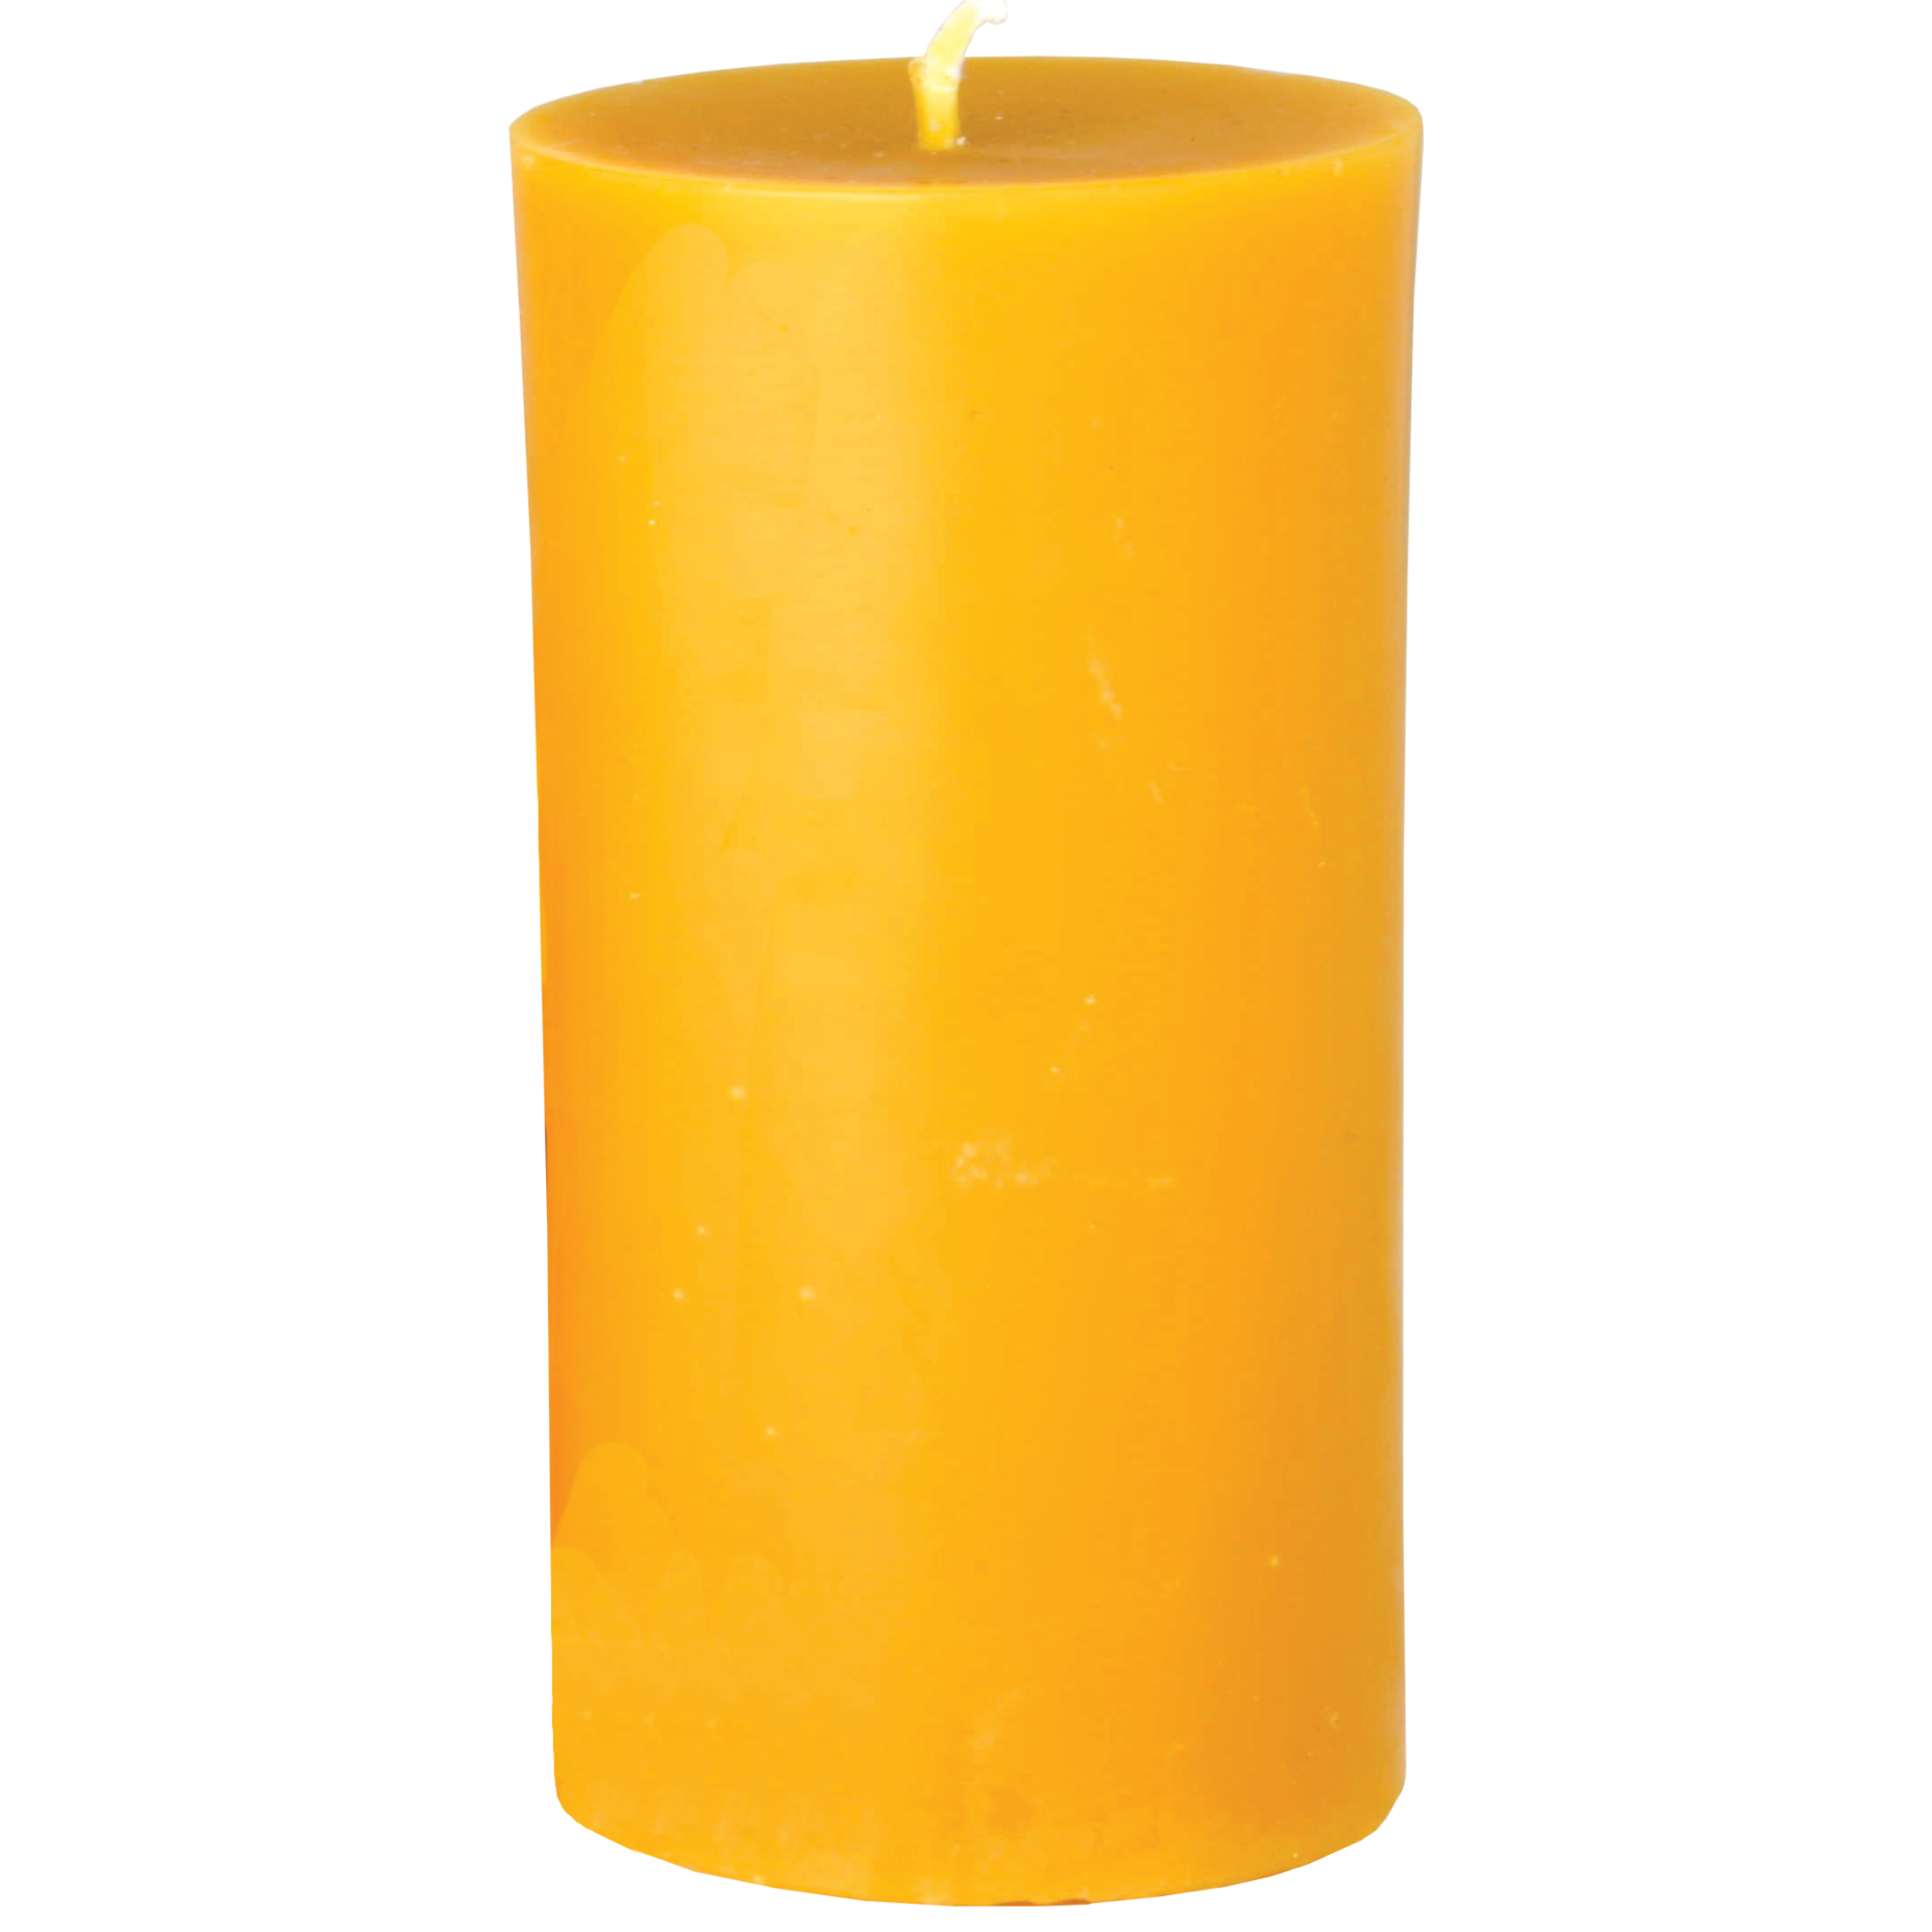 0310 Beeswax Pillar Candle, pack of 6